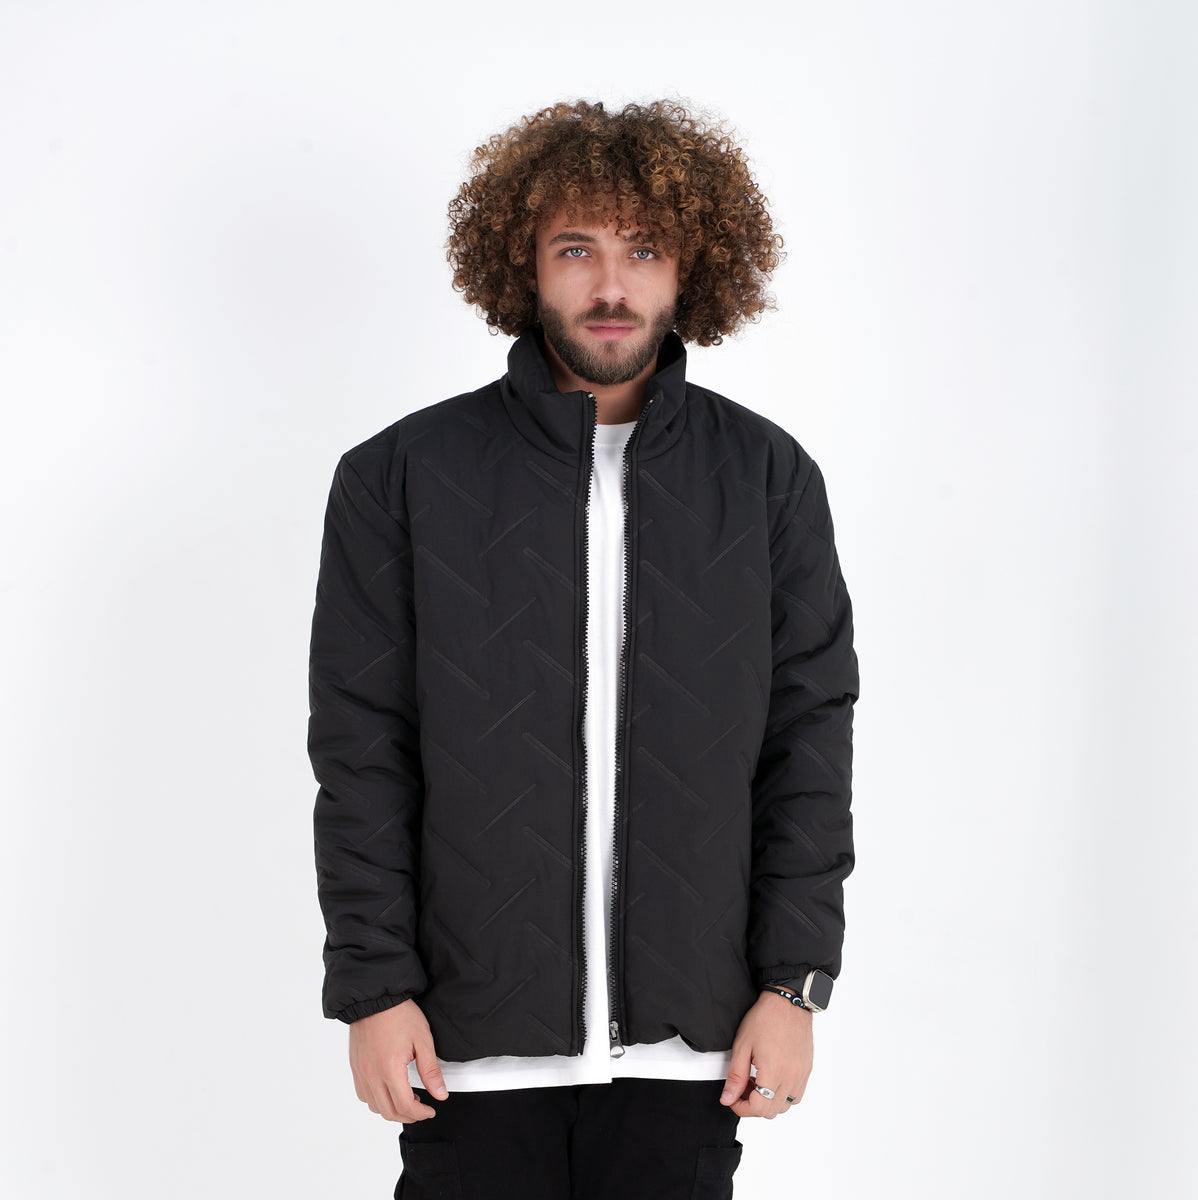 M24GA012-men's jacket made of black waterproof material with a pattern ...